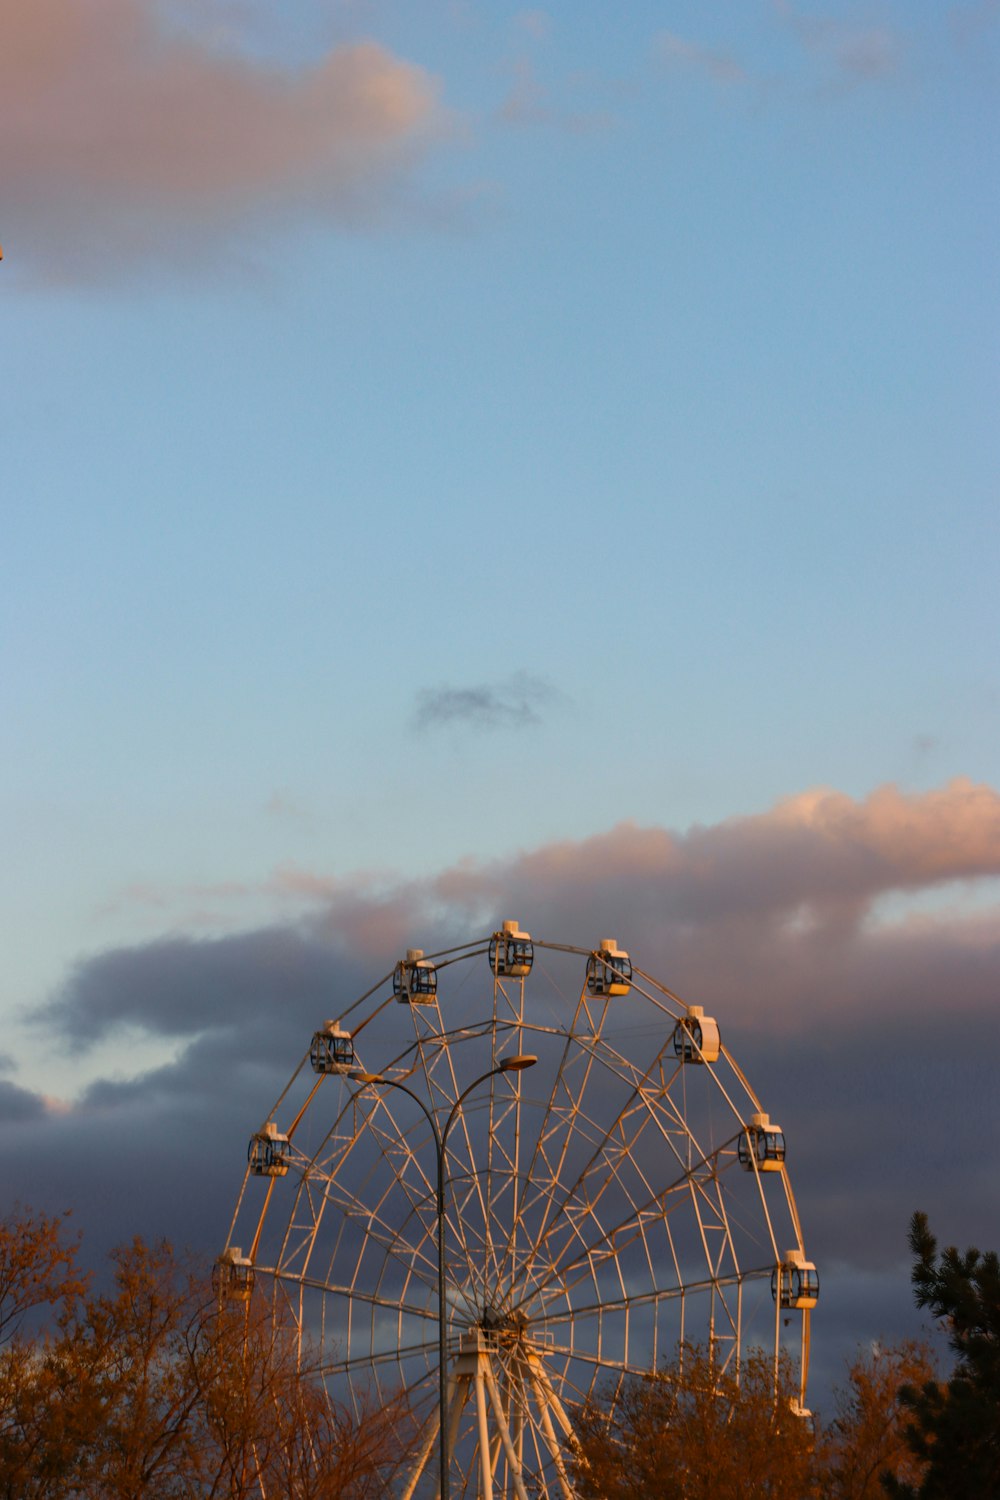 a ferris wheel in front of a cloudy sky